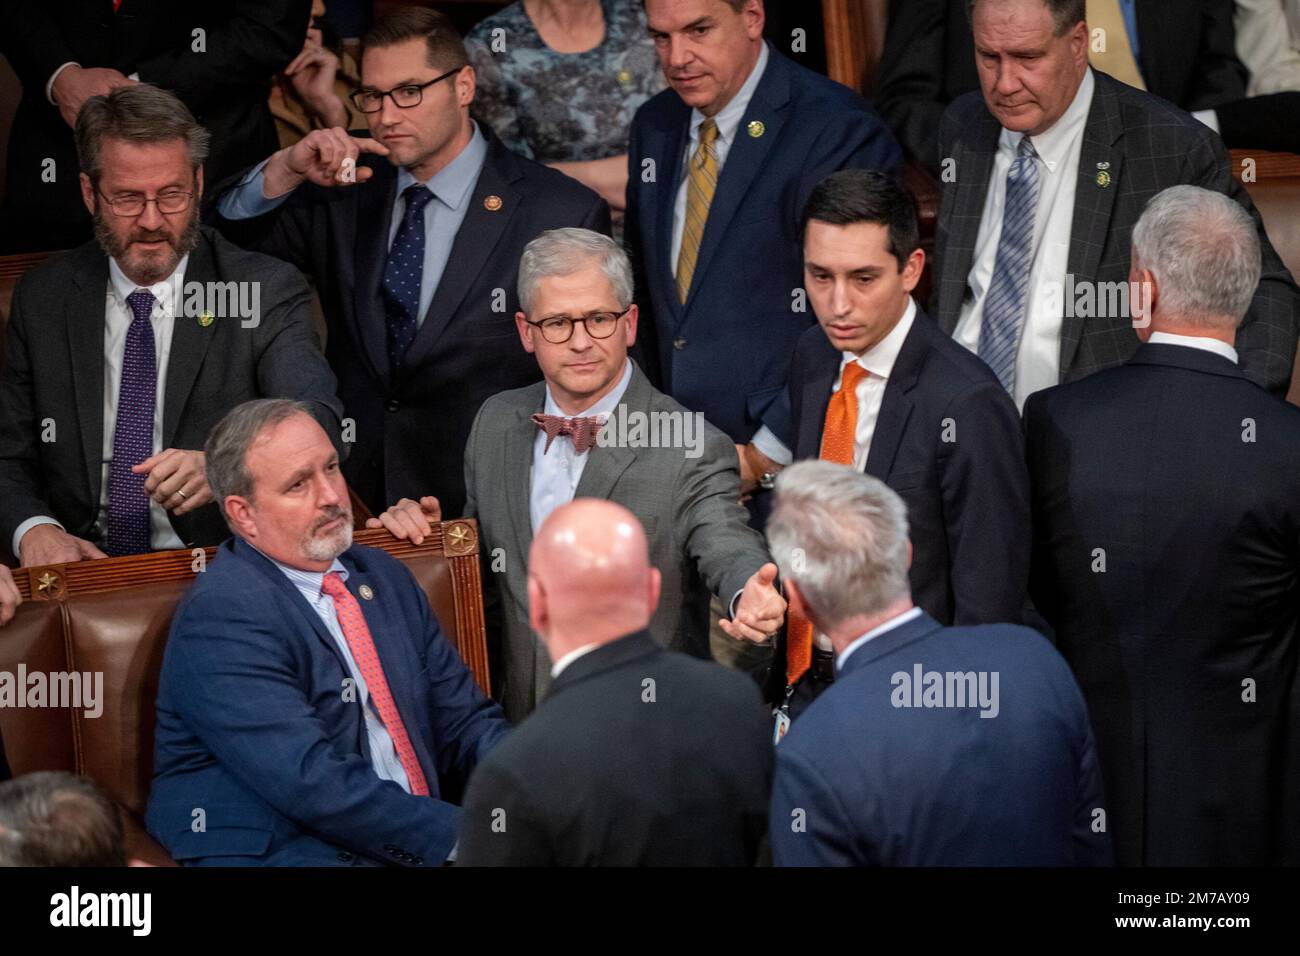 United States Representative Patrick McHenry (Republican of North Carolina) tries to calm down the tension following a verbal confrontation between United States Representative Matt Gaetz (Republican of Florida), who voted 'present,” and US House Republican Leader Kevin McCarthy (Republican of California), after Mr. McCarthy failed to get the votes he needed for the Speakership, on the 14th vote attempt, at the US Capitol, in Washington, DC, USA, Saturday, January 7, 2023. Photo by Rod Lamkey/CNP/ABACAPRESS.COM Stock Photo